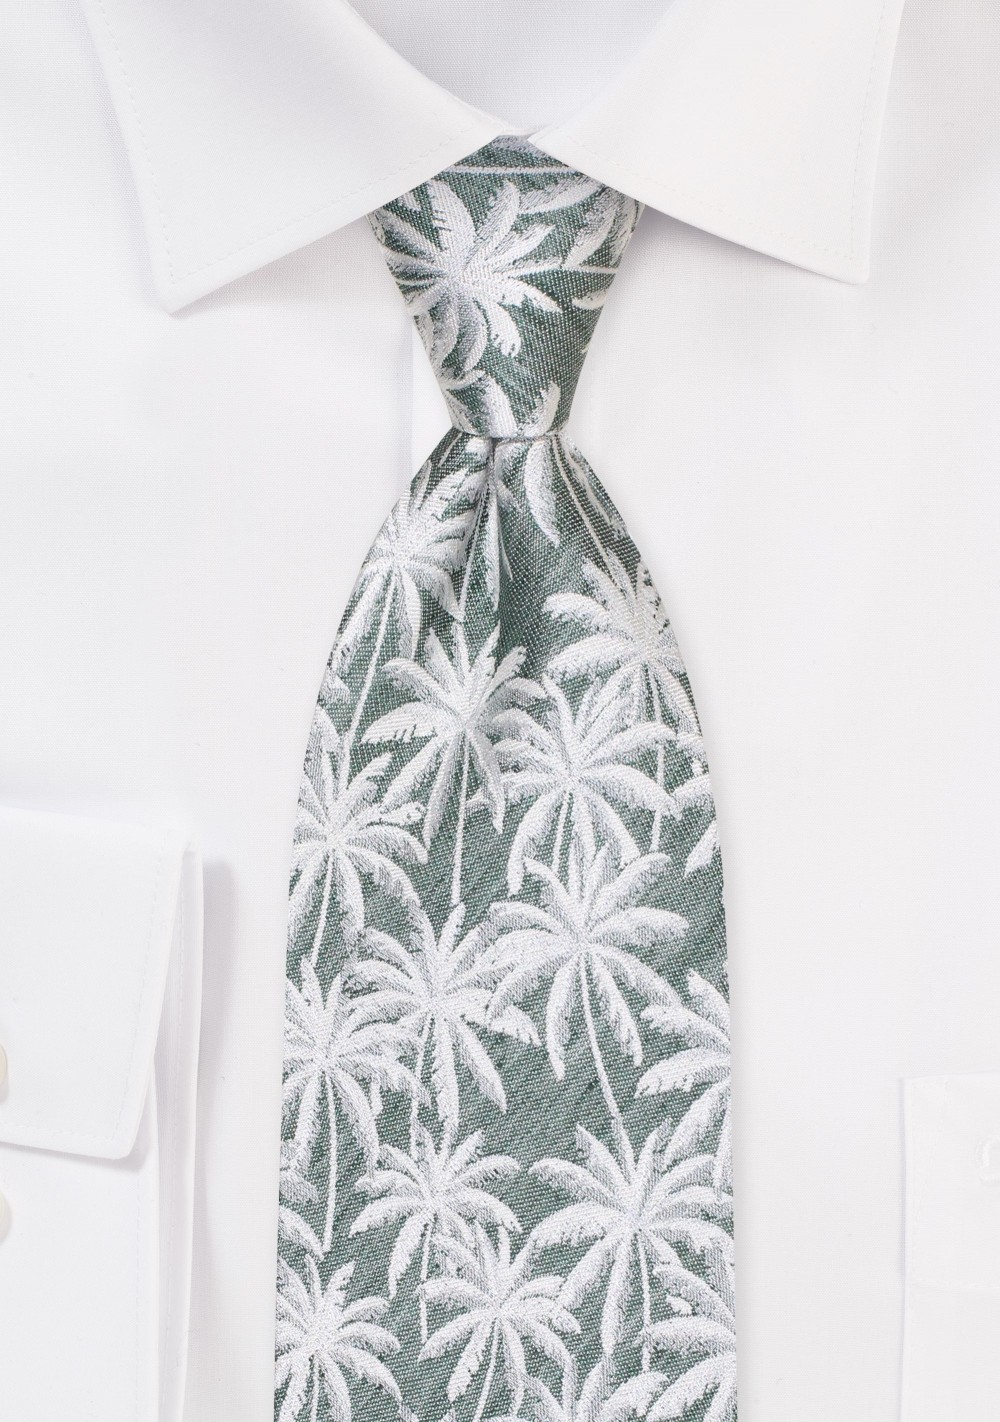 Green Linen Silk Tie for Kids with Palm Trees